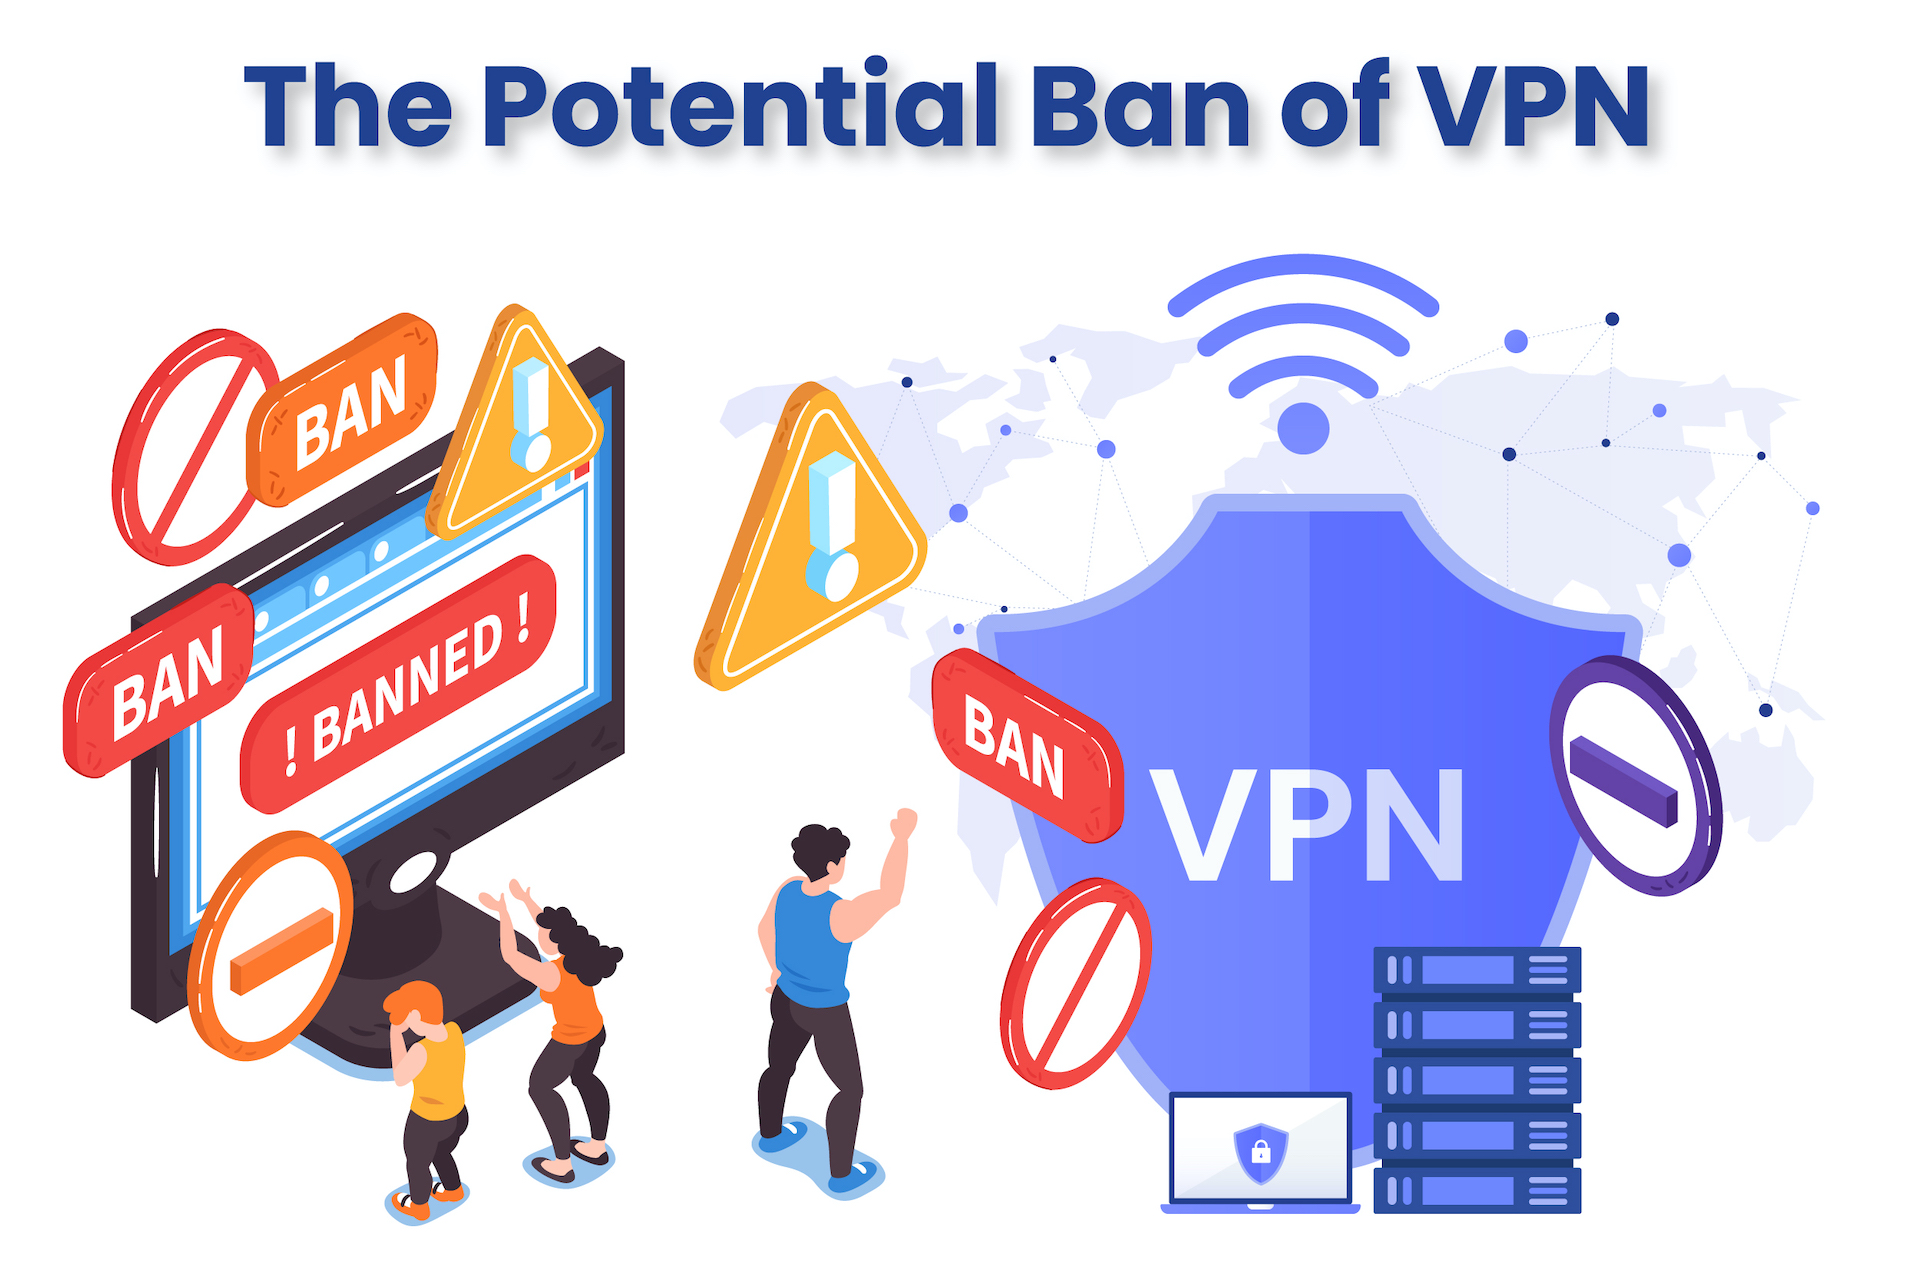 The Potential Ban of VPN